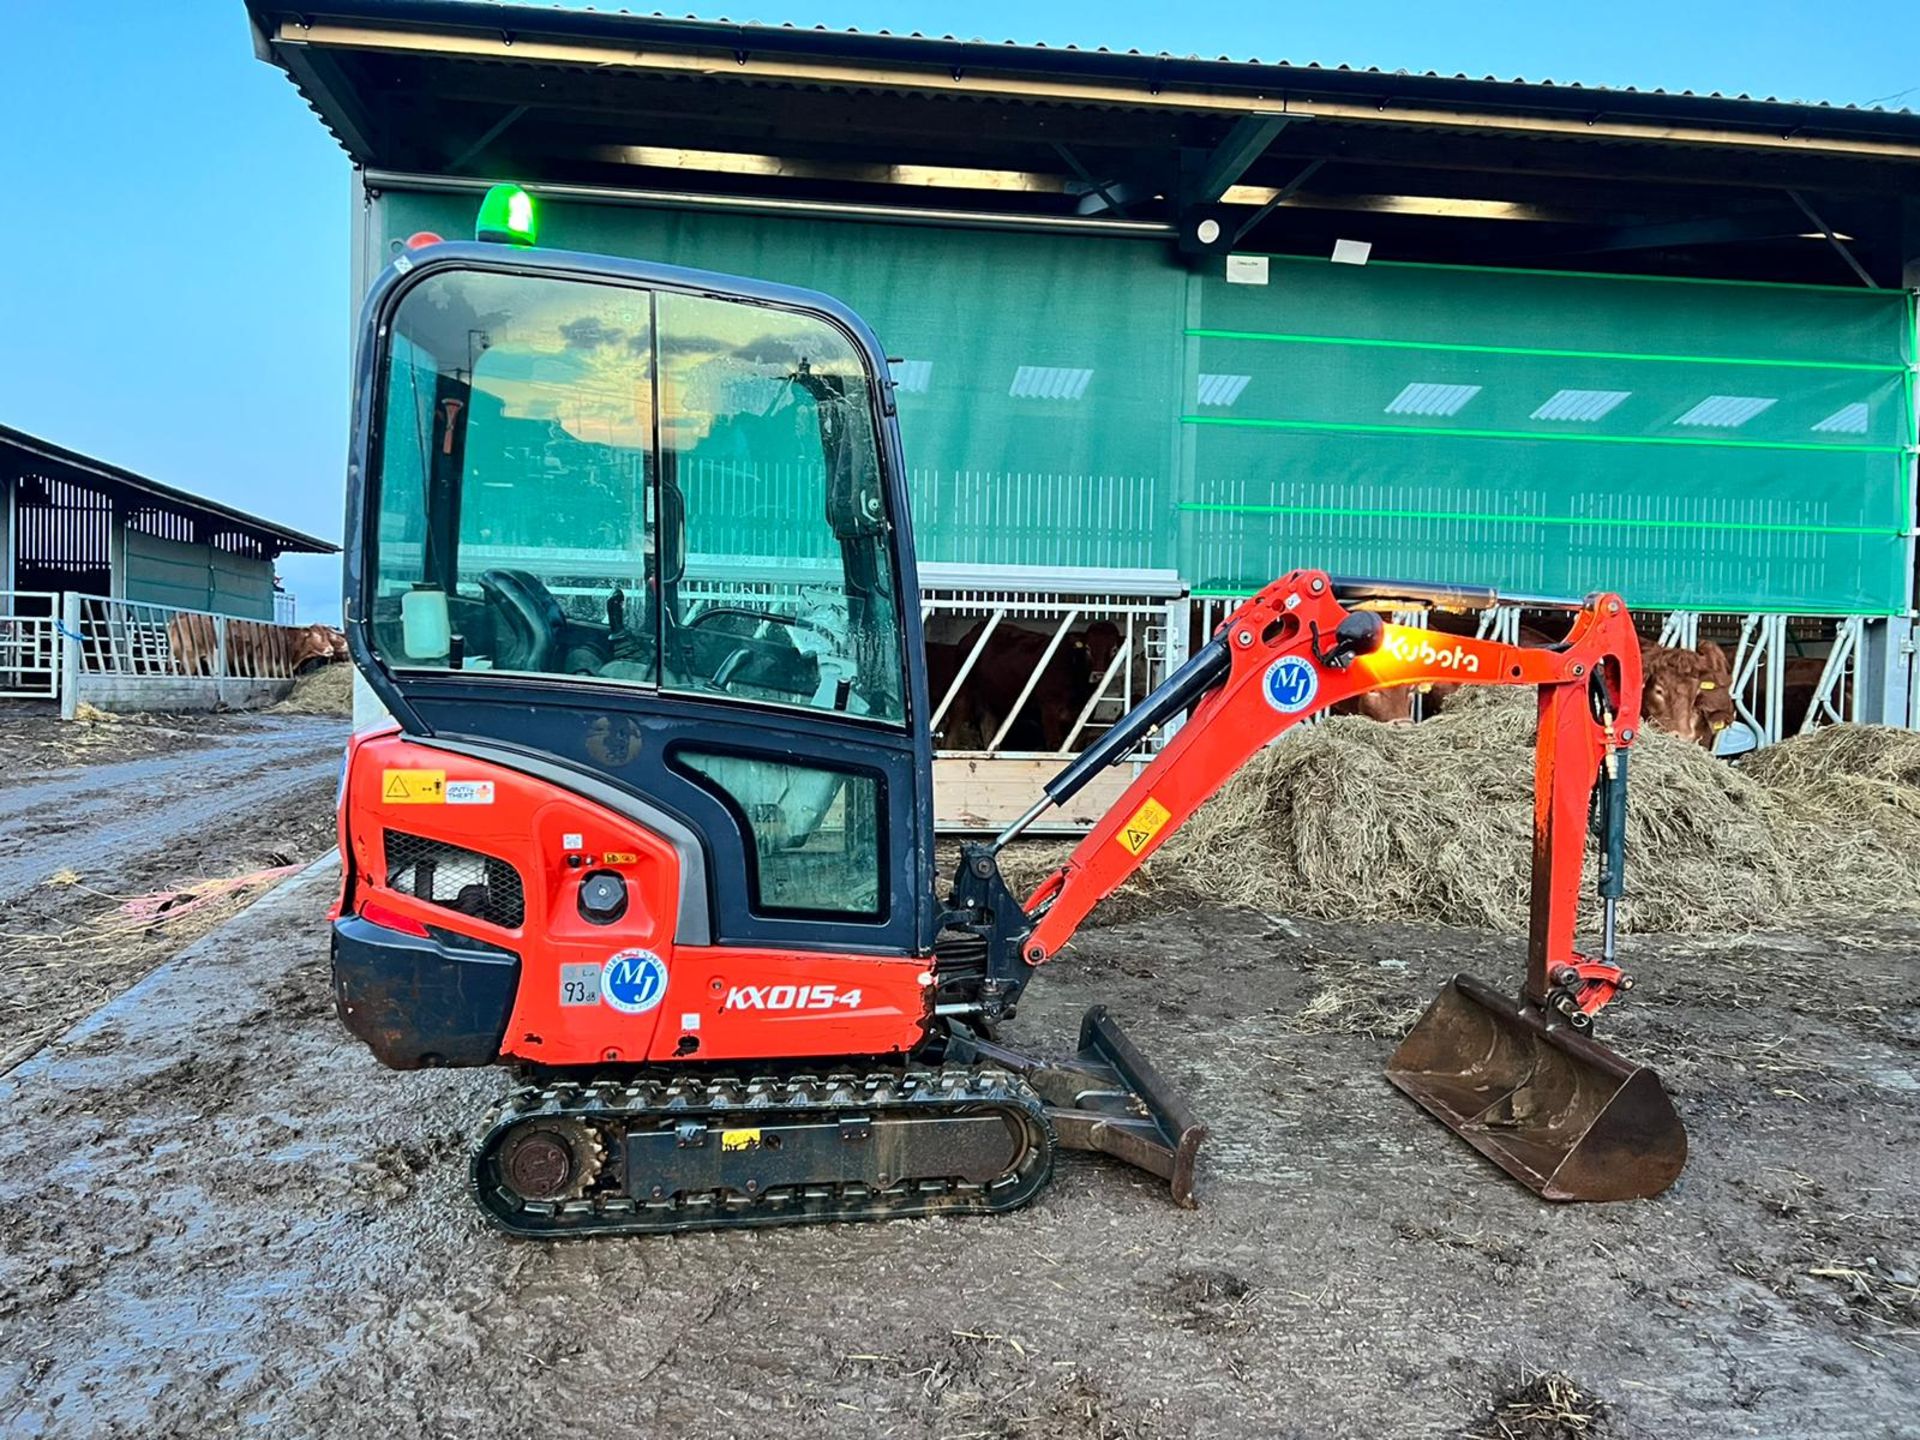 2015 KUBOTA KX015-4 1.5 TON MINI DIGGER, RUNS DRIVES DIGS, SHOWING A LOW AND GENUINE 1850 HOURS - Image 6 of 11